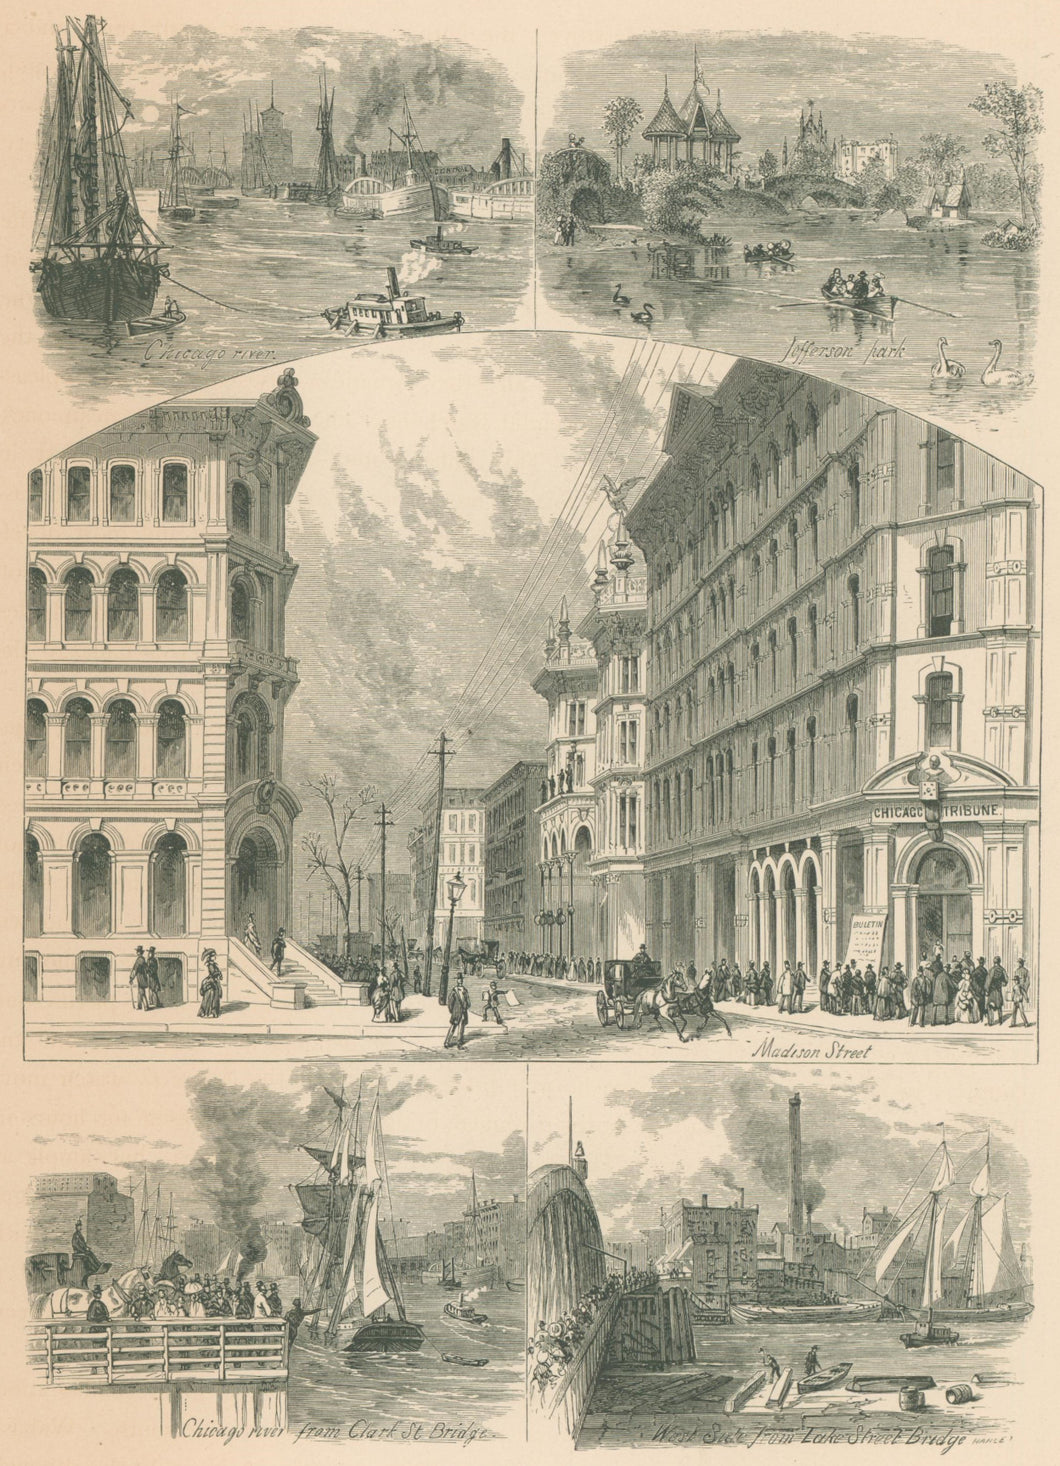 Waud, Alfred R. “Scenes in Chicago” [vertical] From 